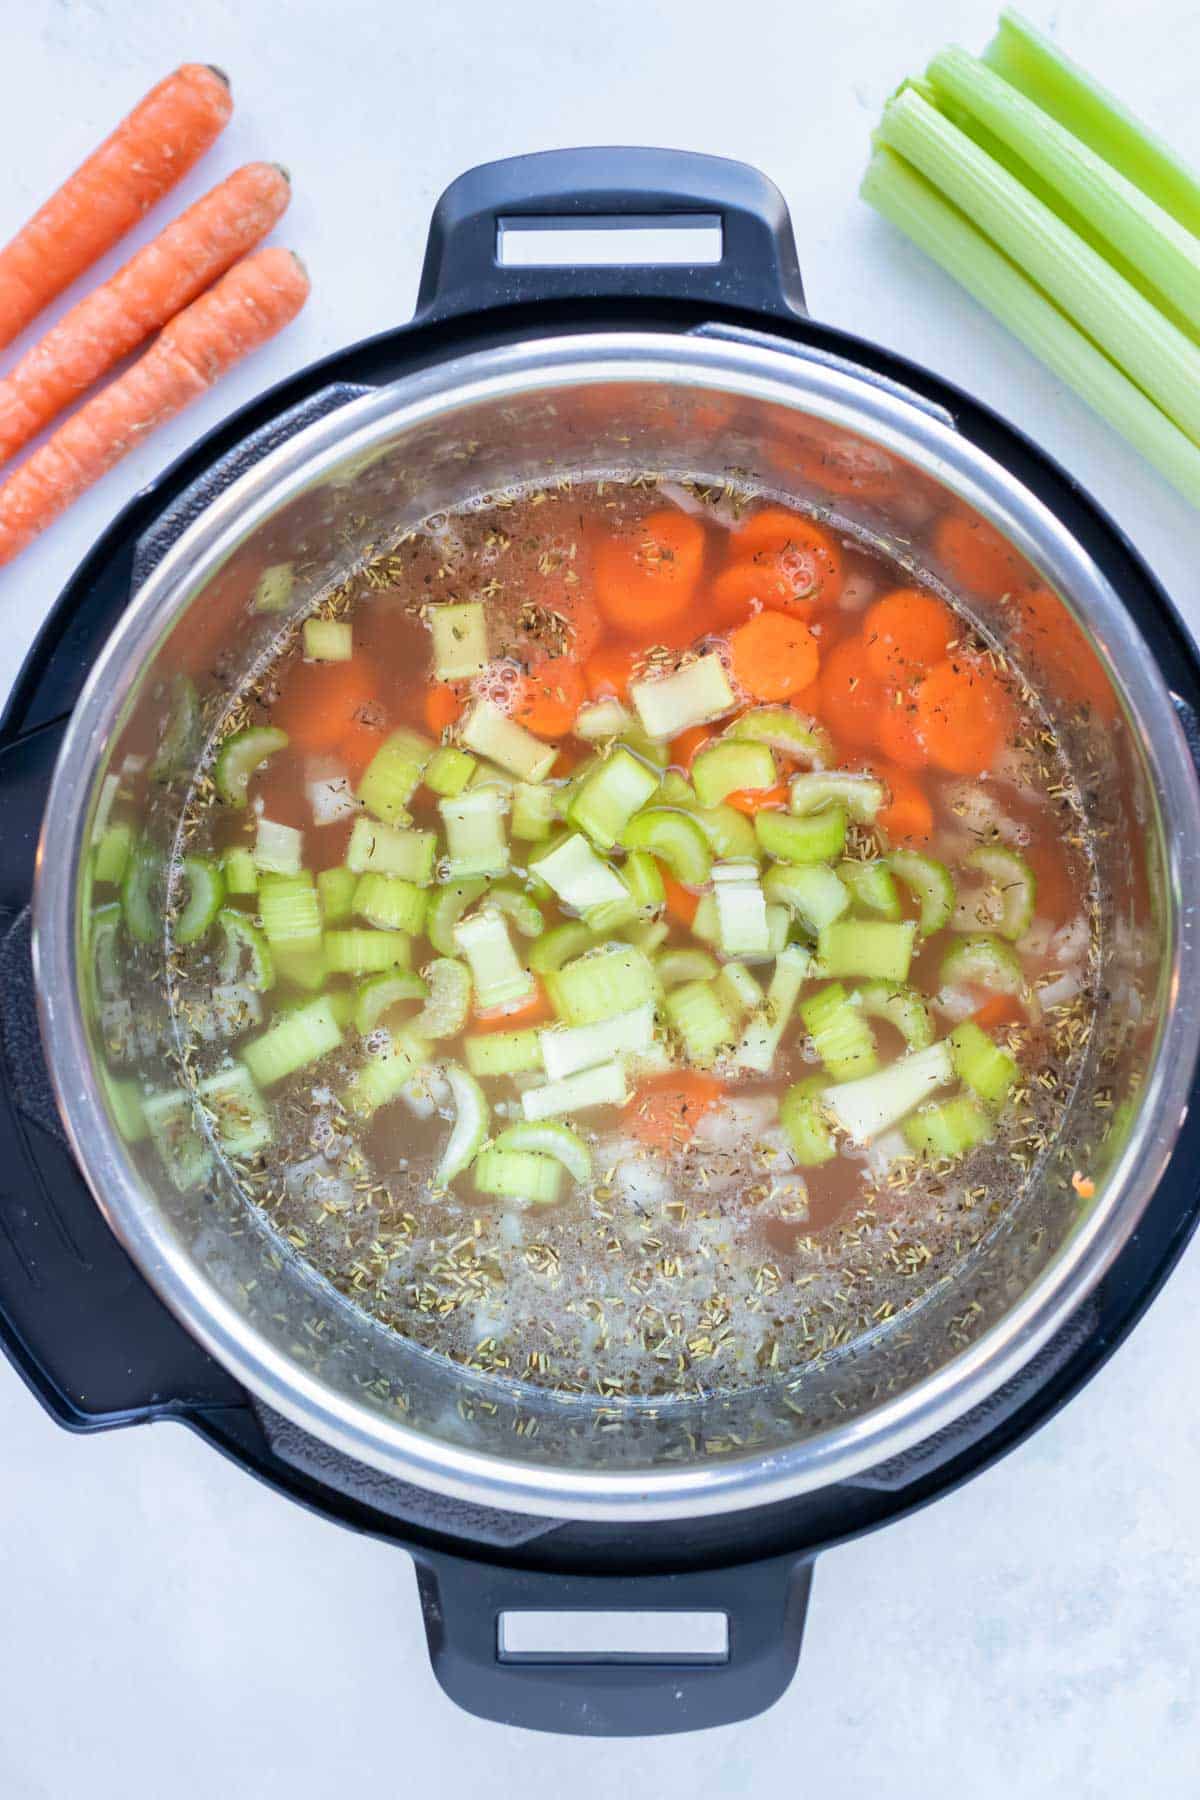 Chopped carrots, celery, and broth are cooked in the instant pot.